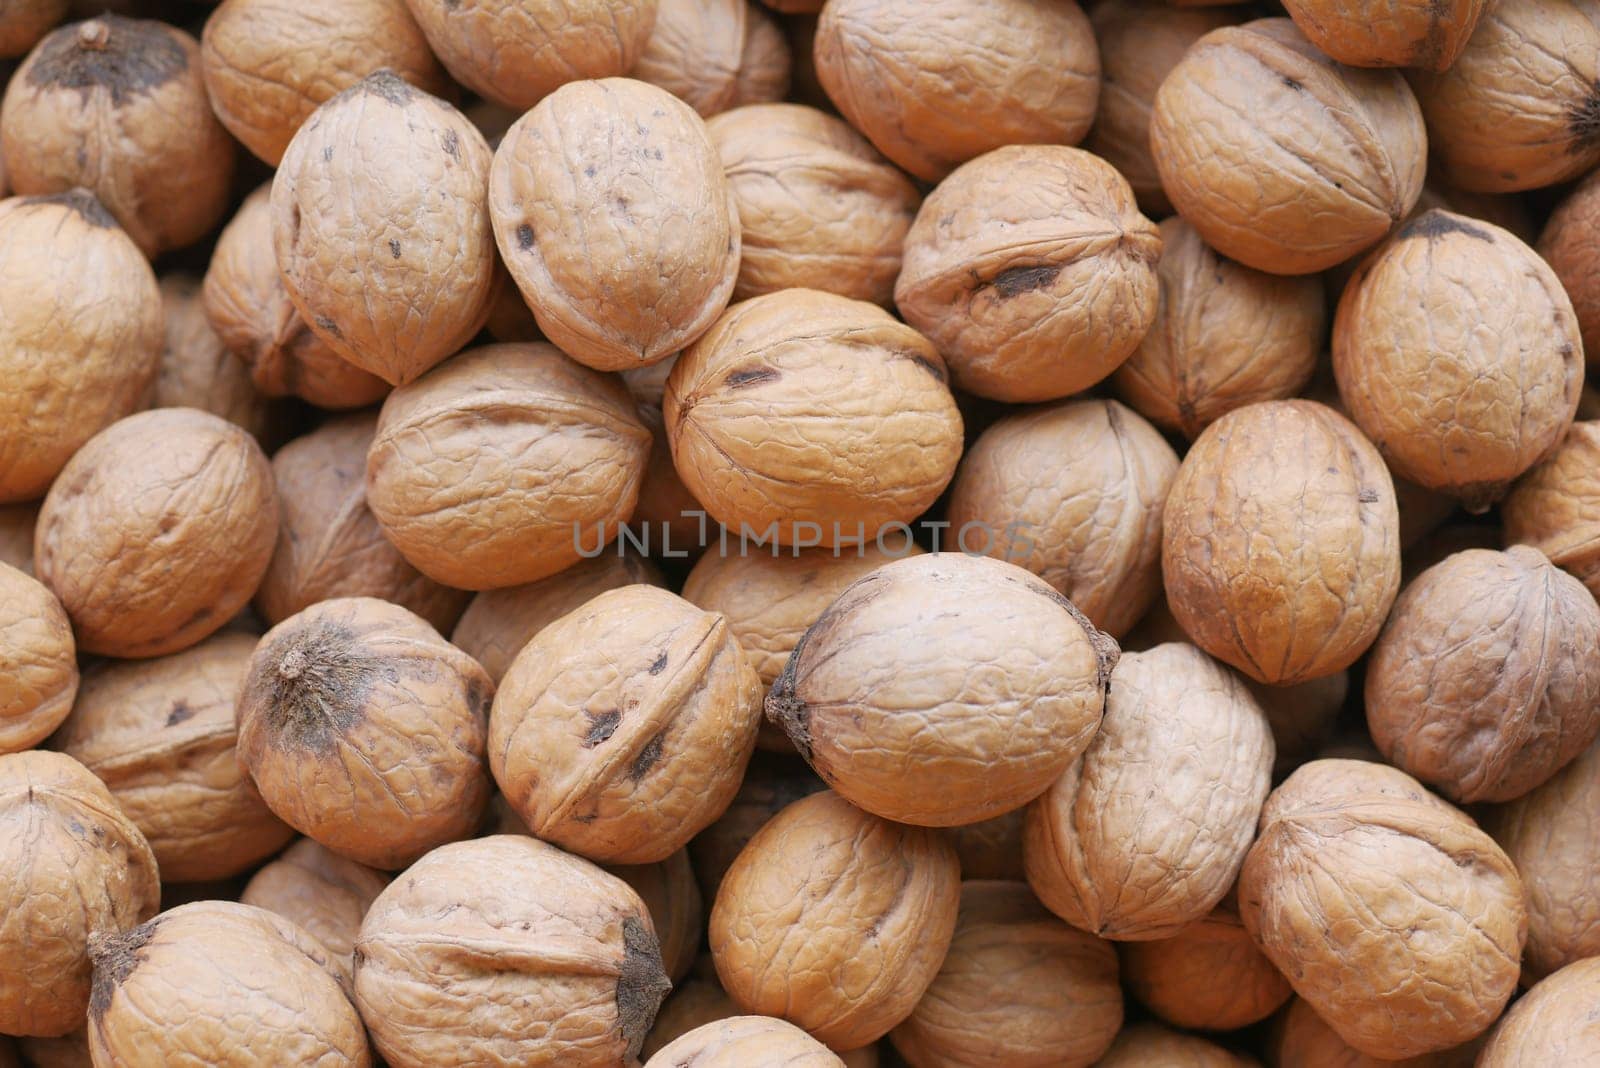 stack of natural walnuts selling at shop by towfiq007